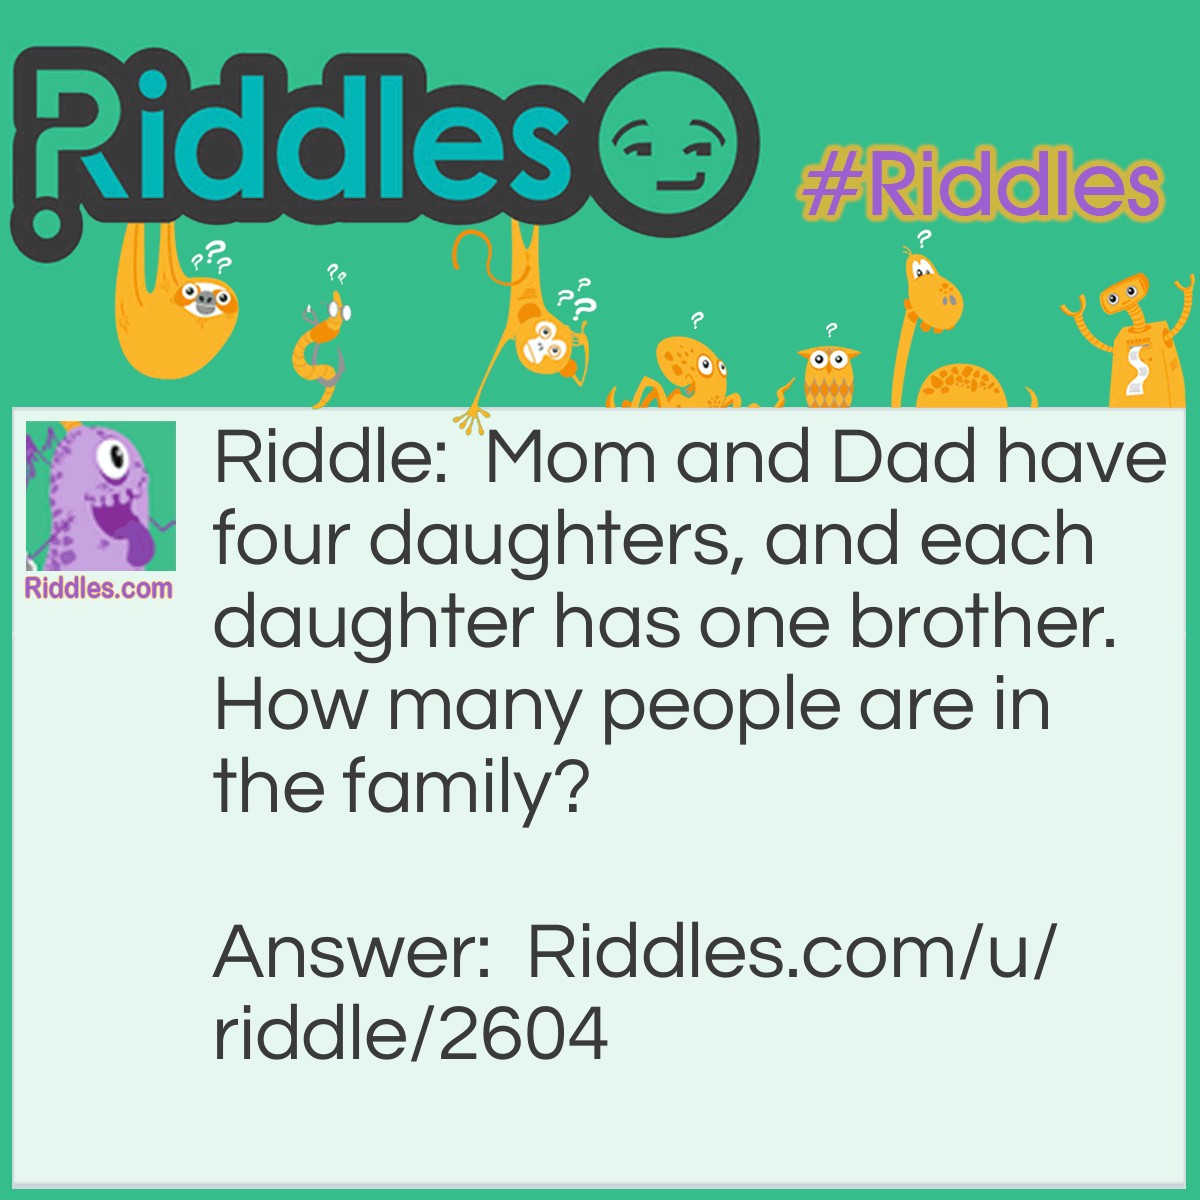 Riddle: Mom and Dad have four daughters, and each daughter has one brother. How many people are in the family? Answer: Seven. The four daughters have only one brother, making five children, plus mom and dad.